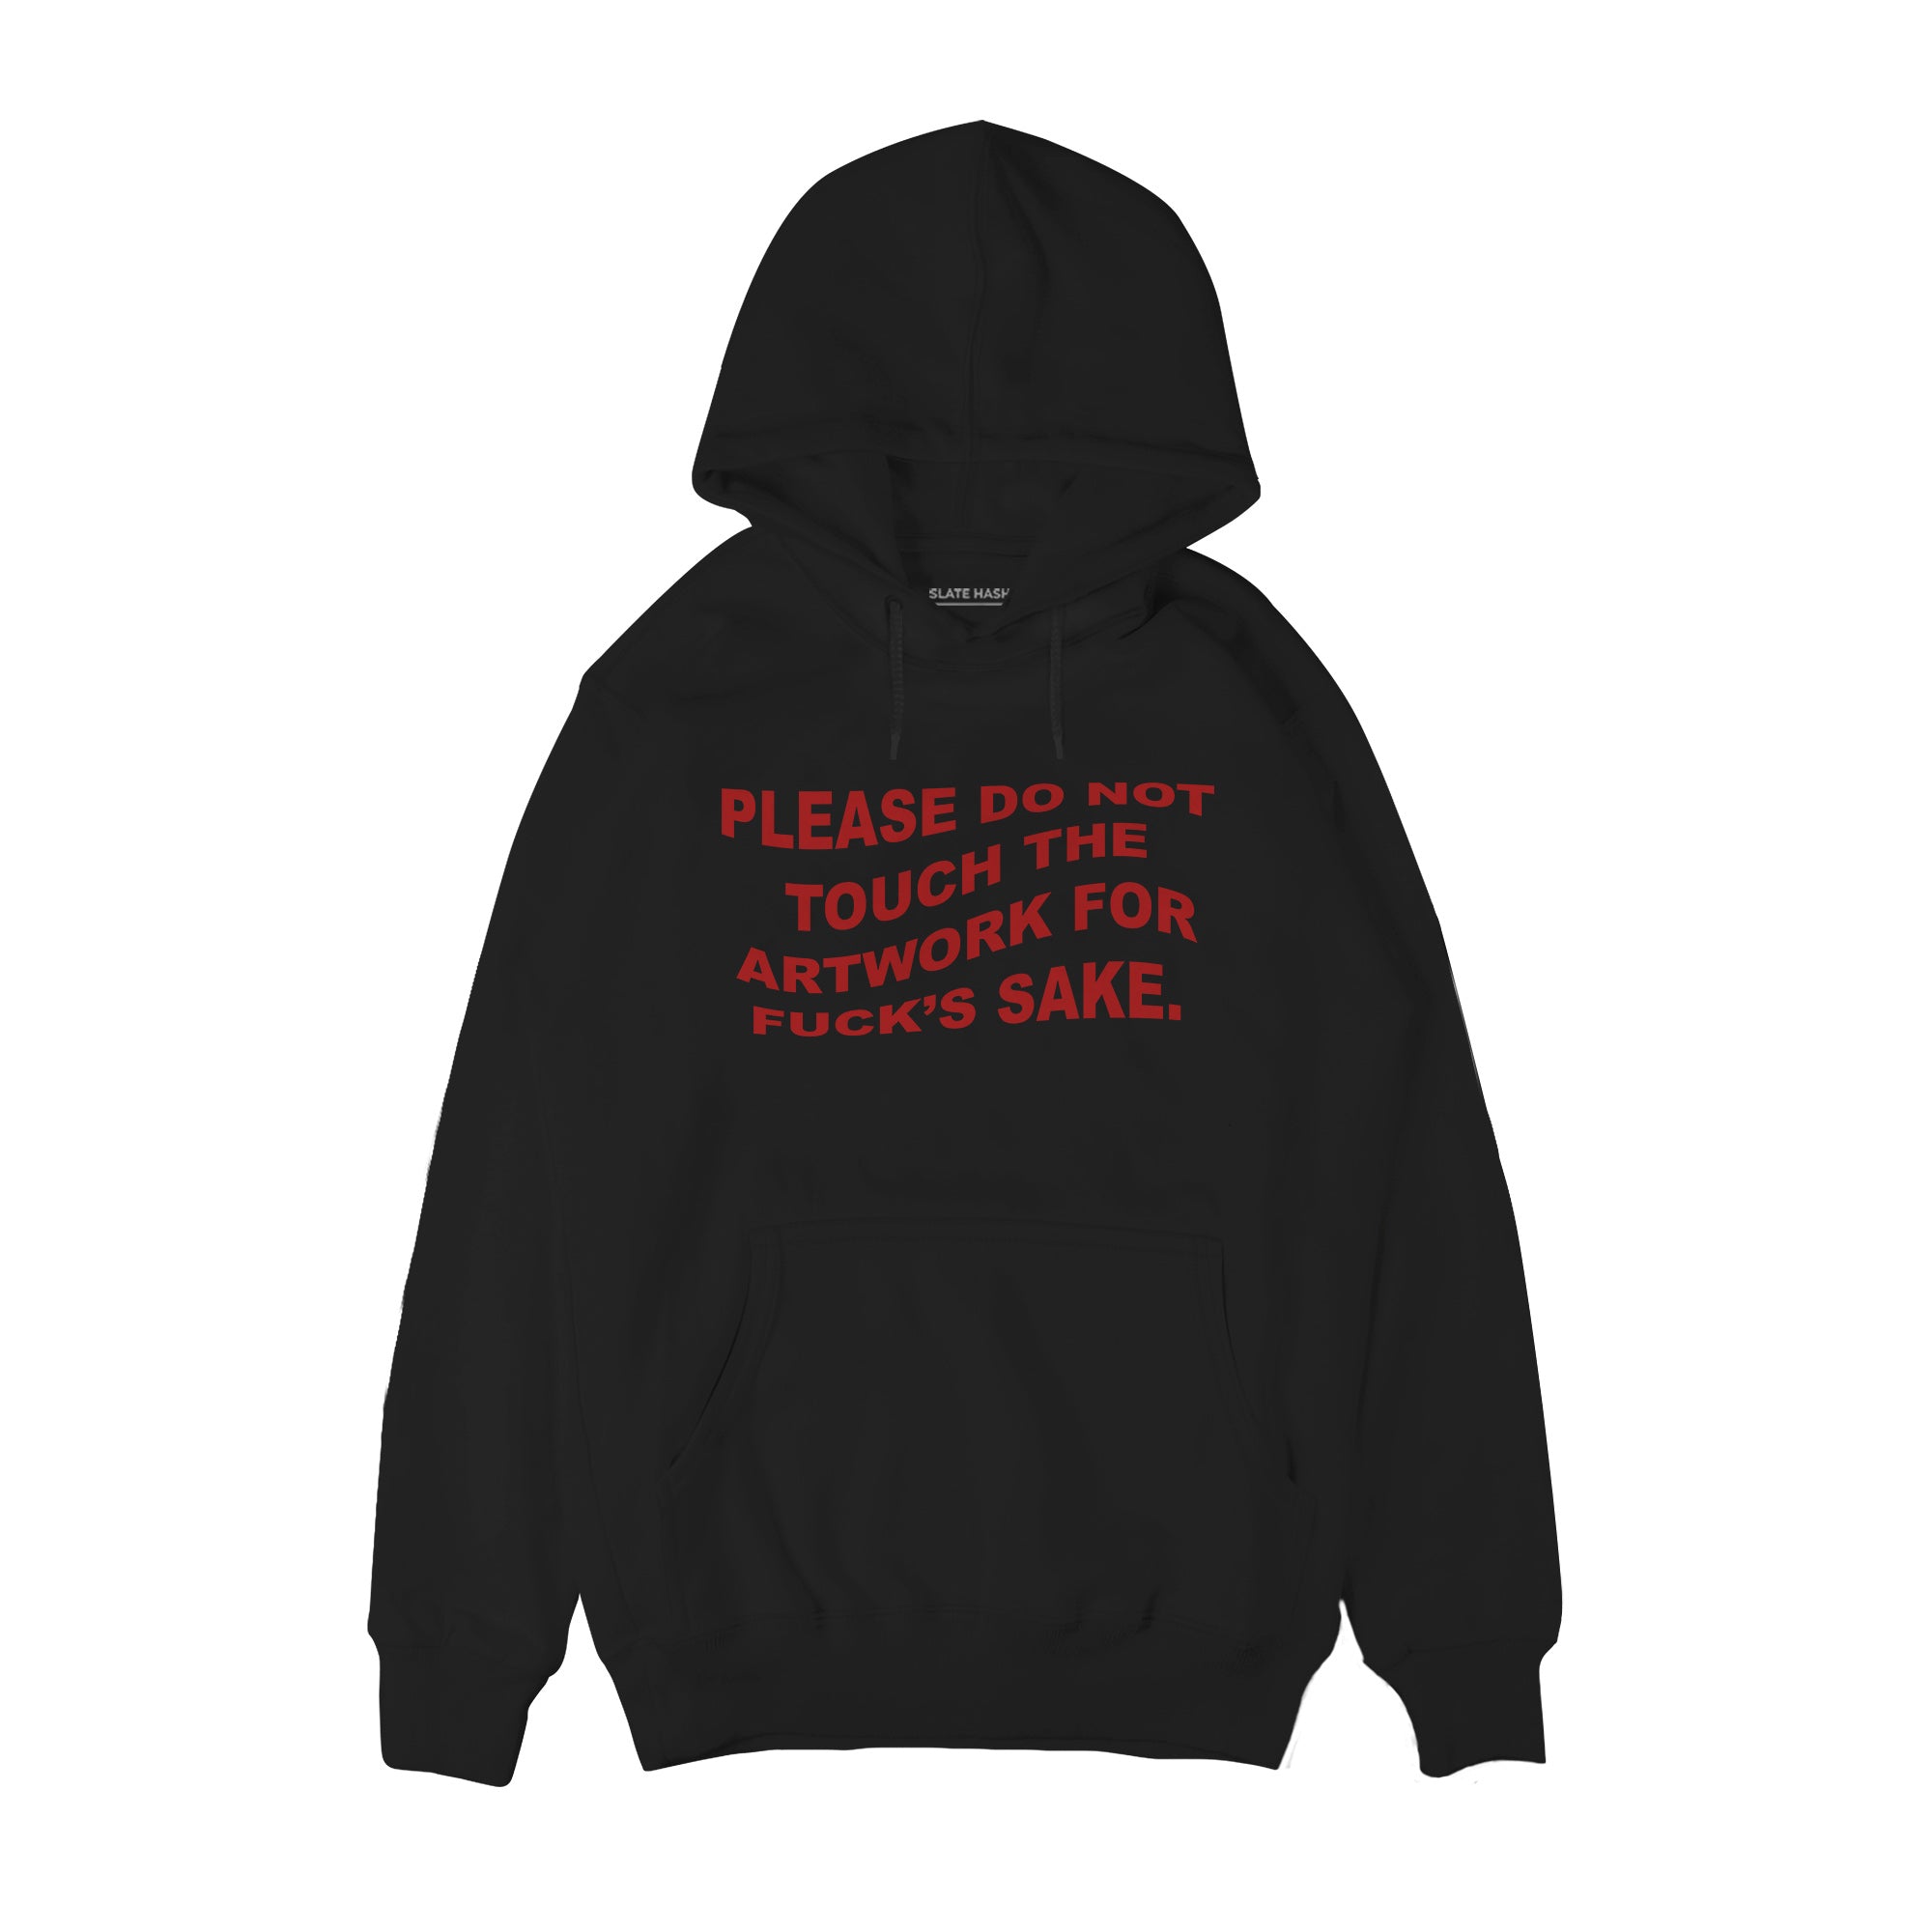 Please do not touch the artwork Hoodie – SLATE HASH